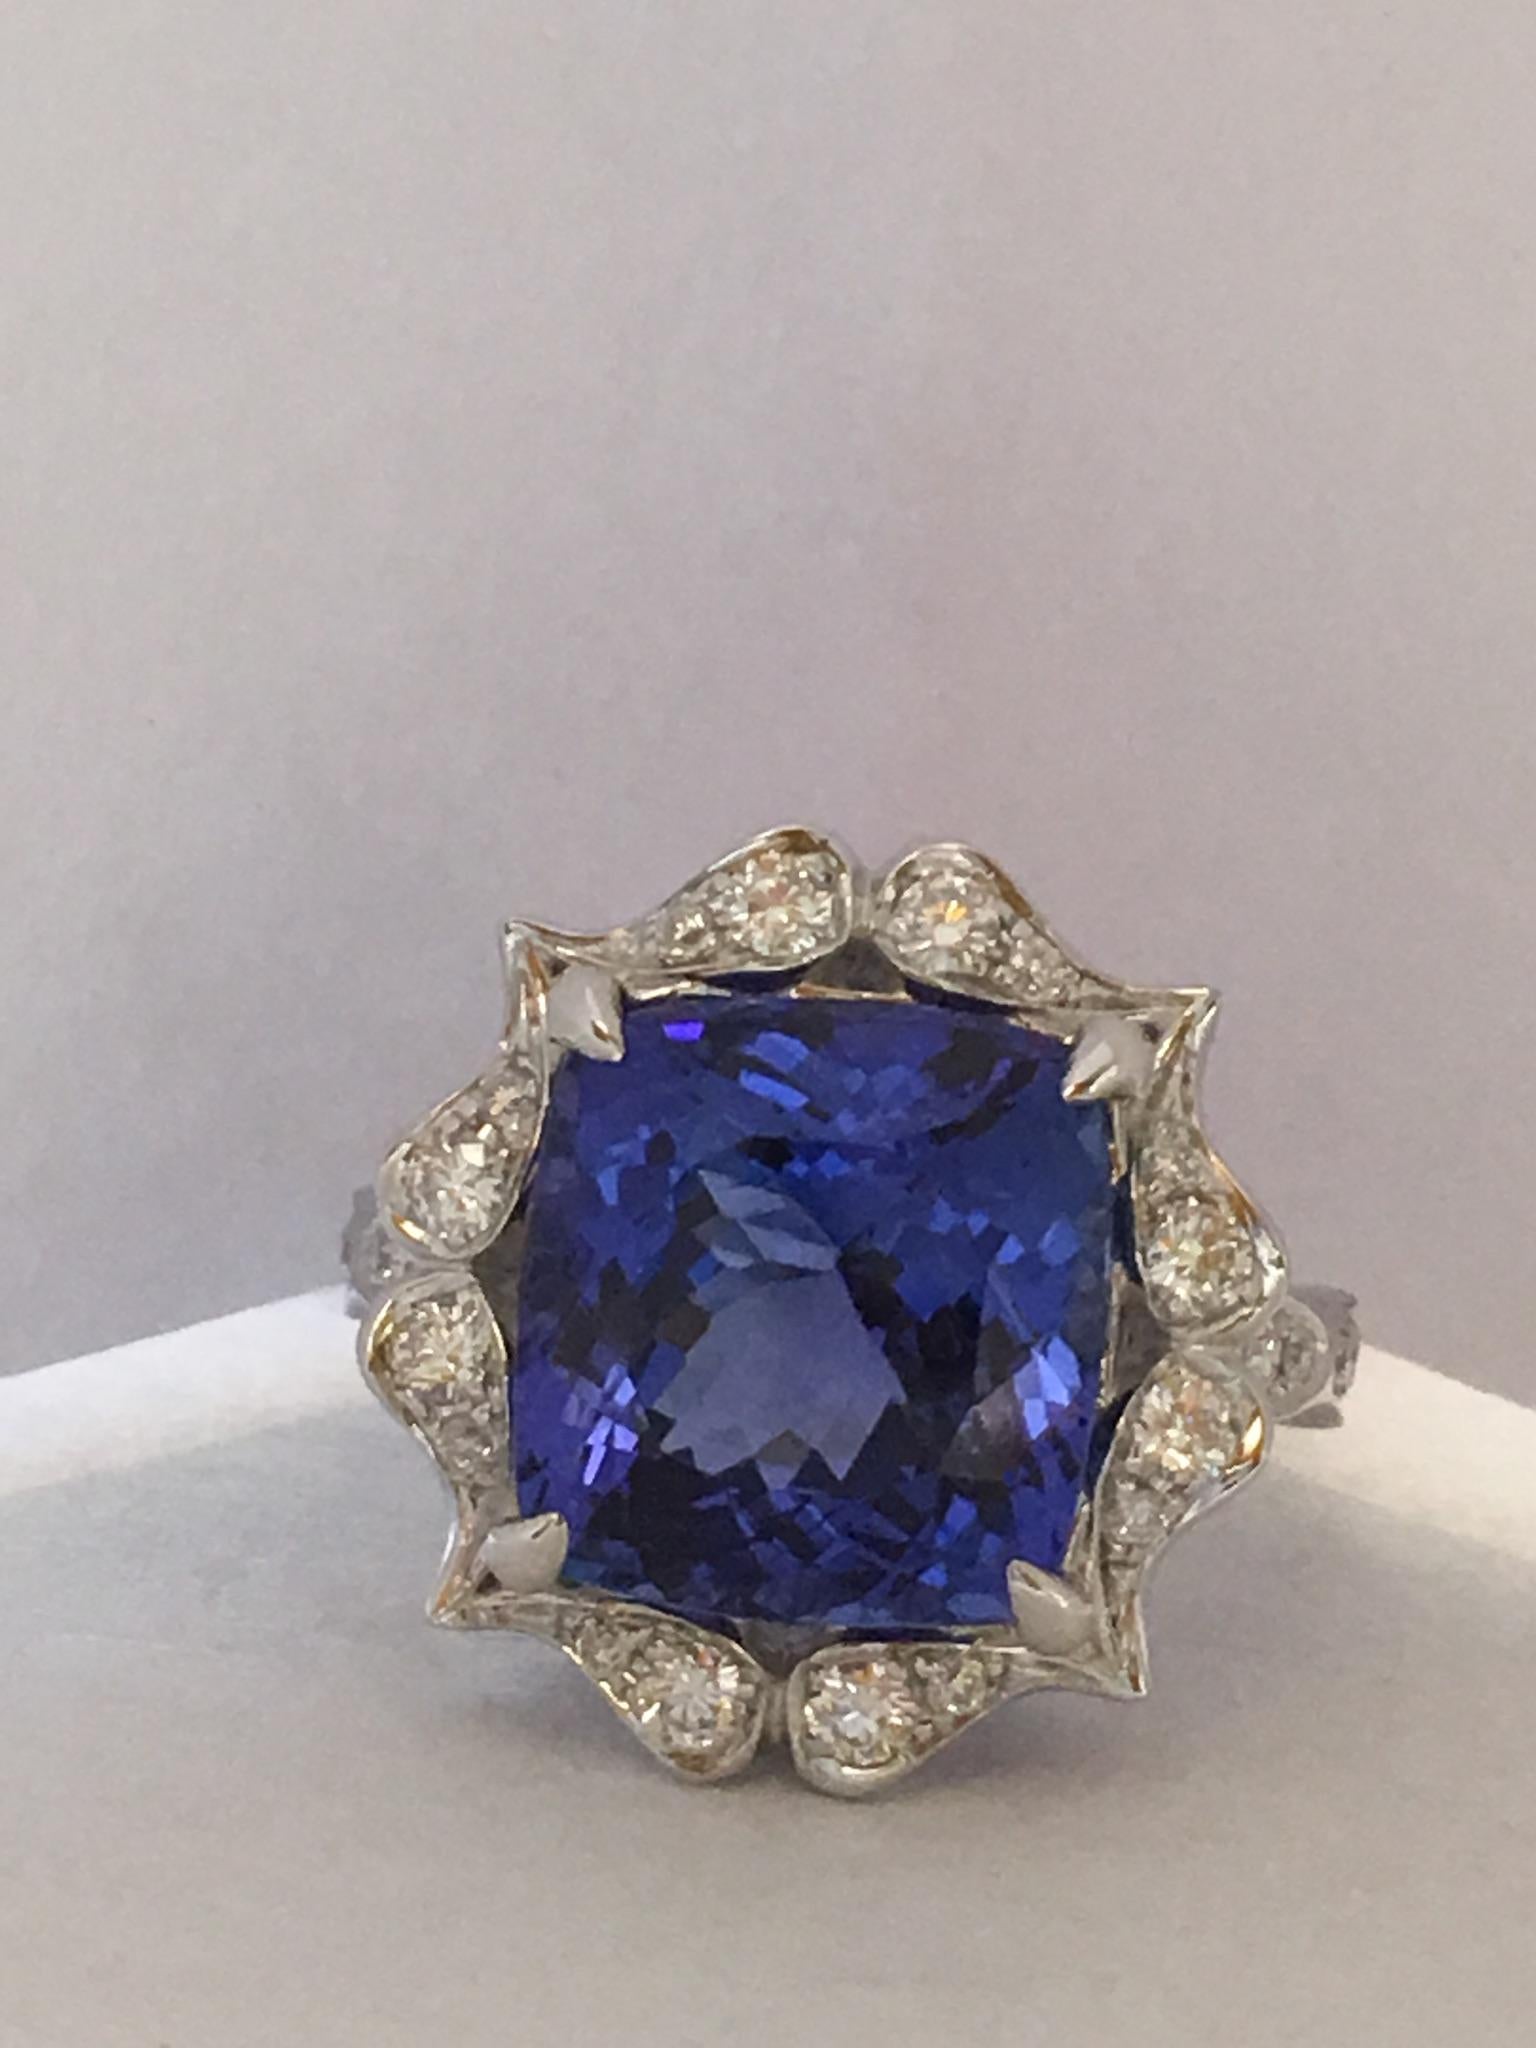 Natural Tanzanite weigh 7.53 Carat and 0.42 Carat diamonds set in 14K white gold is handmade ring.This is AA Quality Tanzanite. The photo is not enhanced or with out photo shop.
